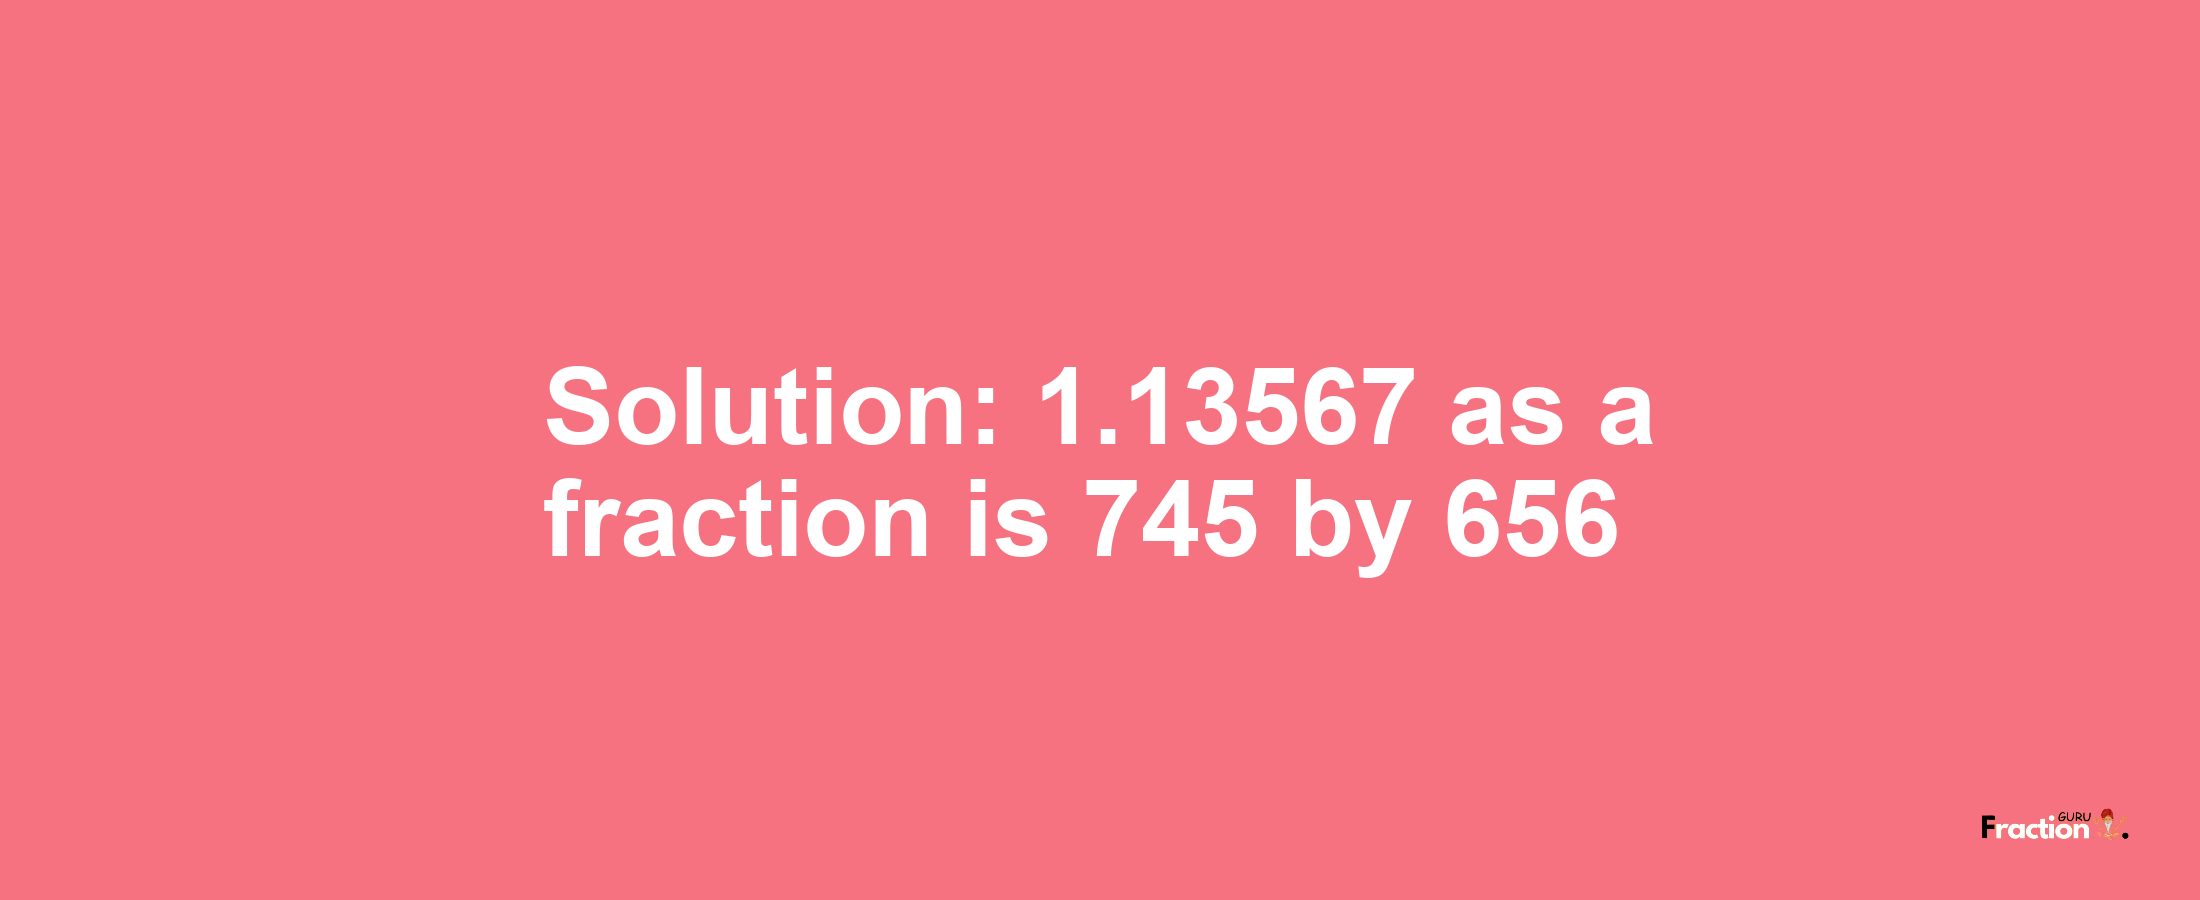 Solution:1.13567 as a fraction is 745/656